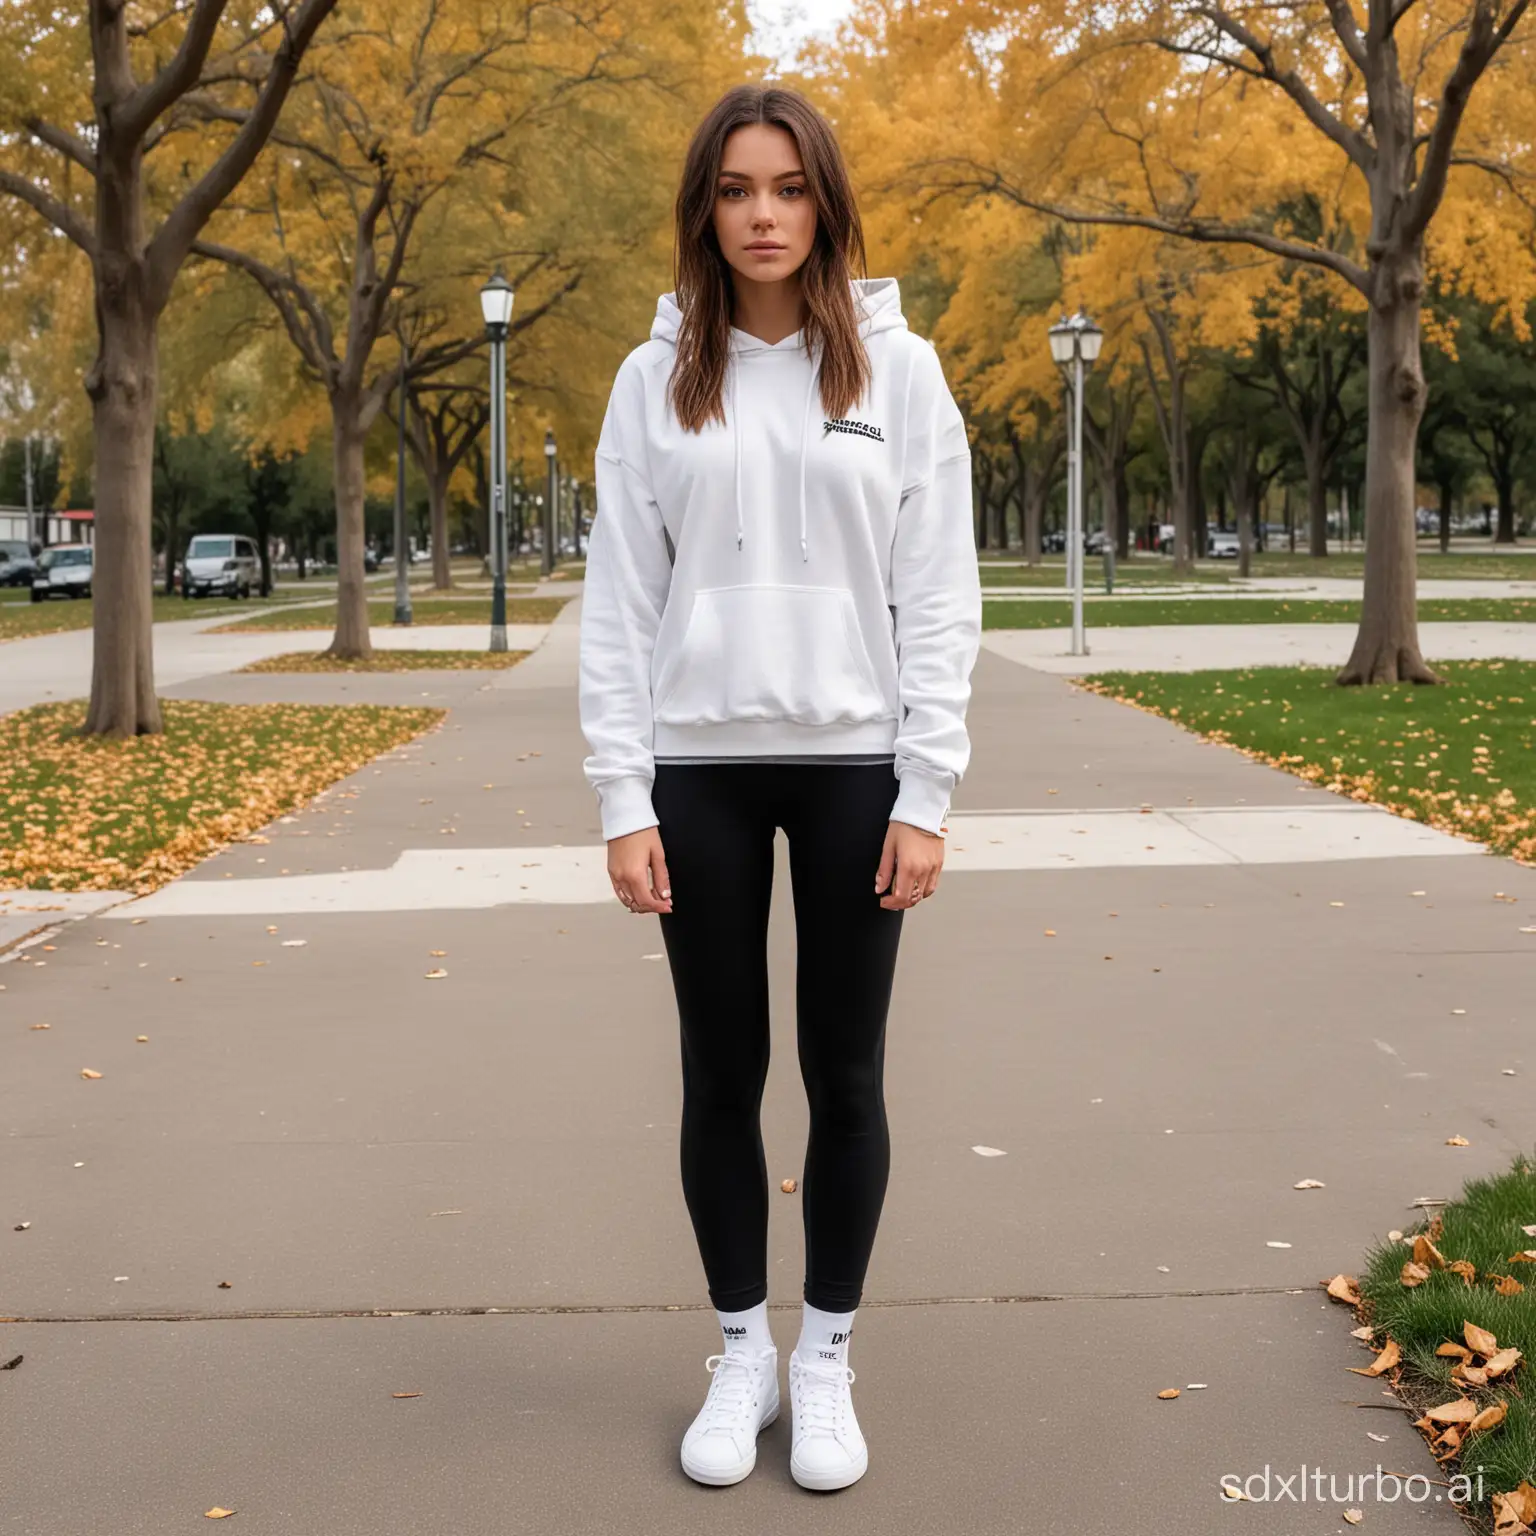 Girl stands in an epic pose with her legs shoulder-width apart, torso slightly turned to the left, 17, athletic, muscular, regular white hoodie, black tight leggings, white high top sneakers, white socks, many details, style raw, long strong thick legs, outside in a park, high angle, 32k, realistic photograph.